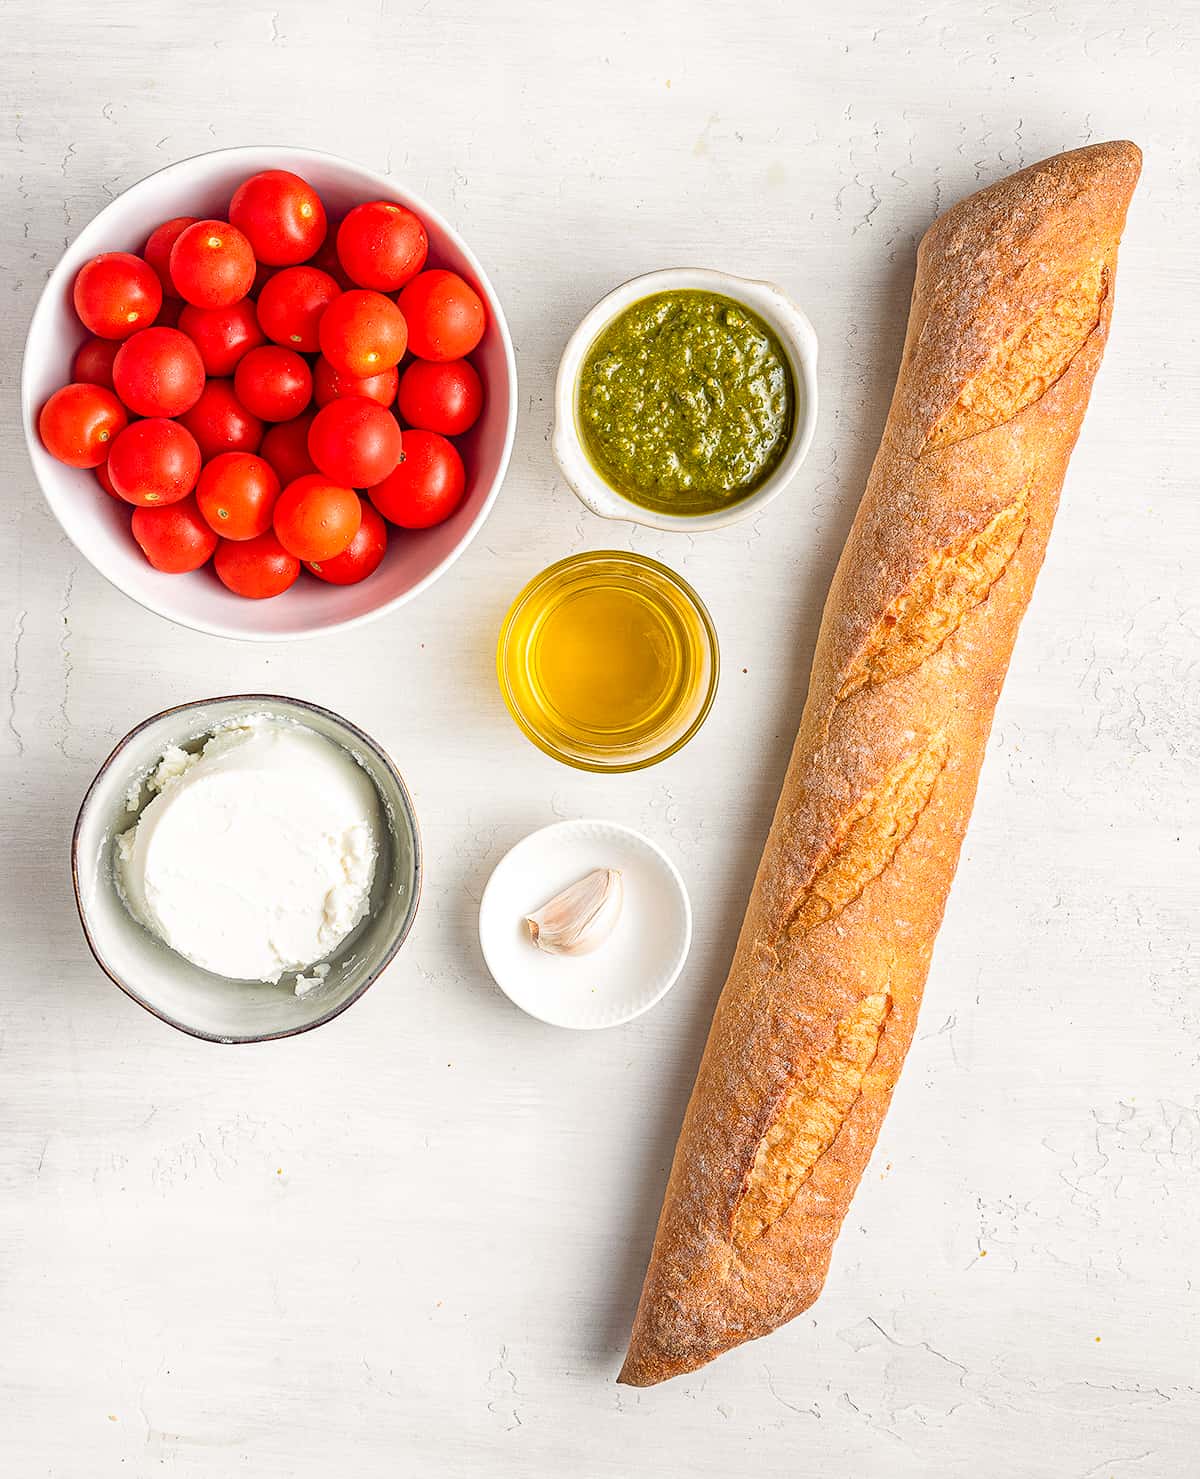 A bowl of cherry tomatoes, a long baguette, ricotta cheese, a garlic clove, pesto and olive oil on a white counter top.